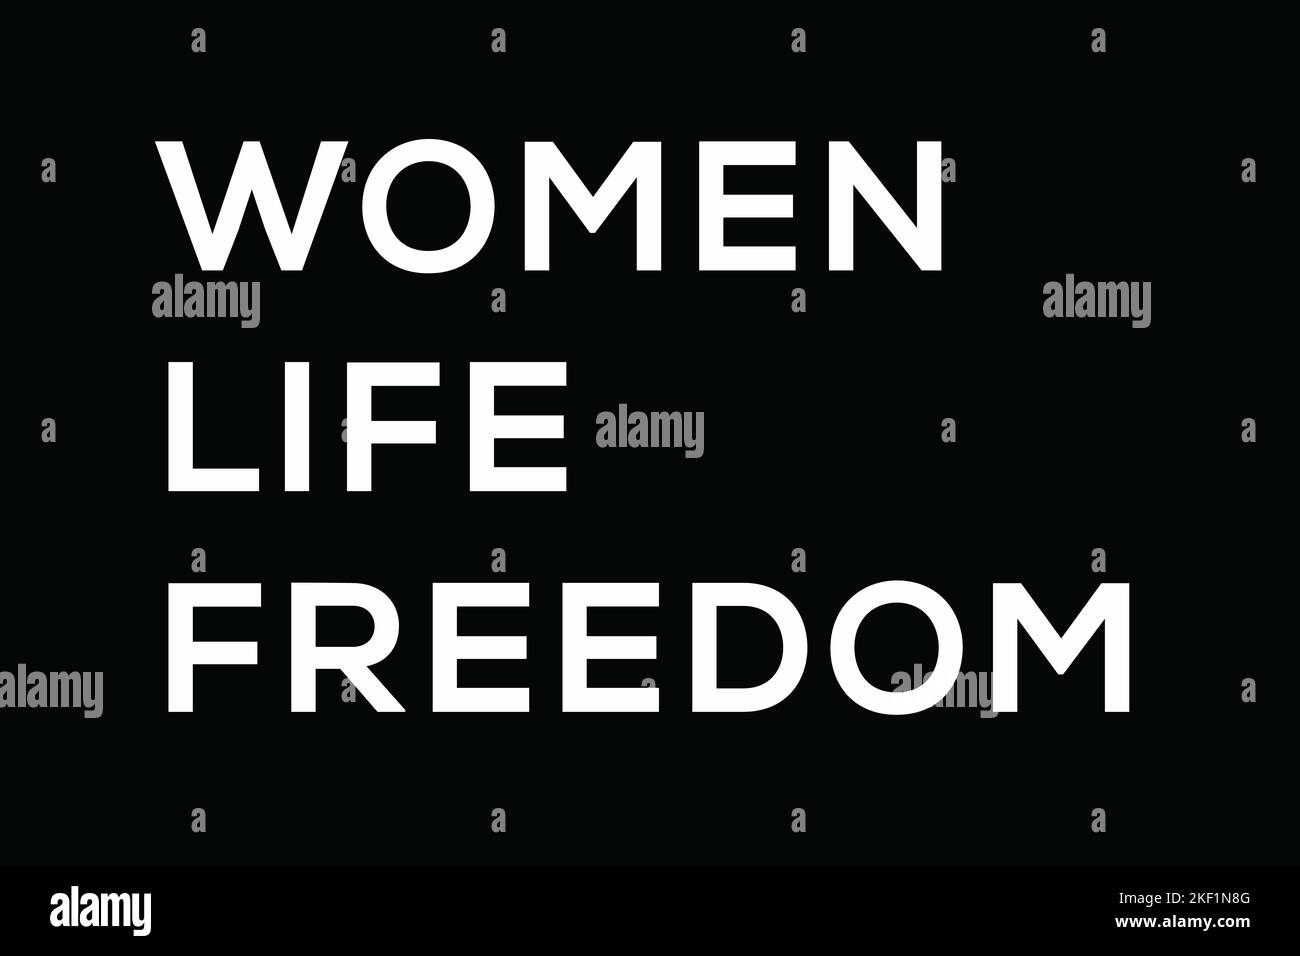 Woman Life Freedom. Free women in Iran. Protest concept. Slogan, banner, poster design. Stock Photo